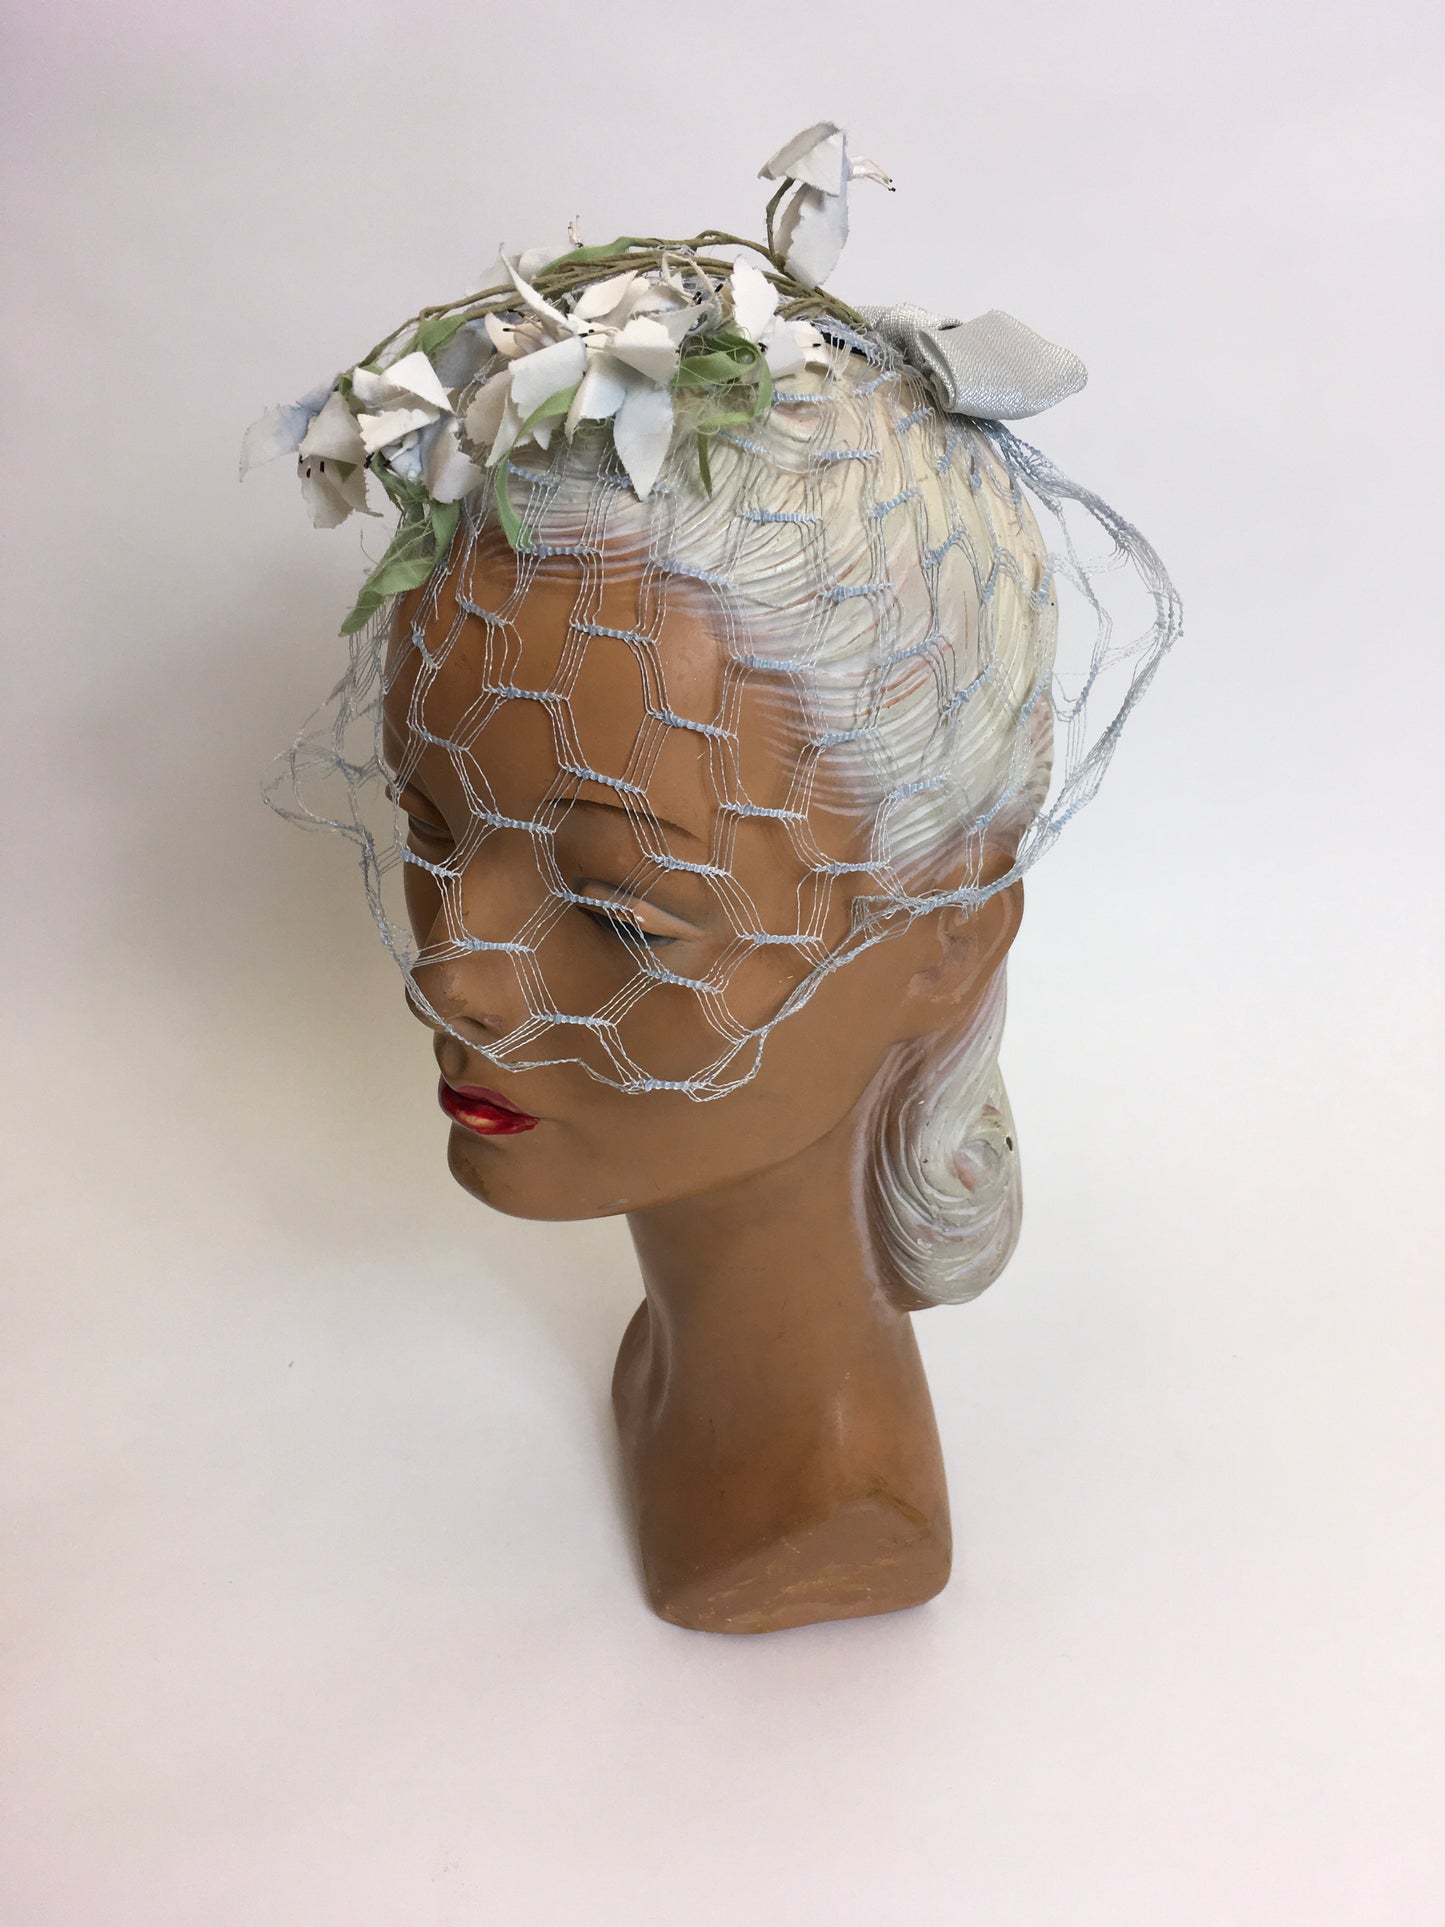 Original late 1940’s early 1950s Headpiece - Powder blue veiling adorned with ivory & green flowers